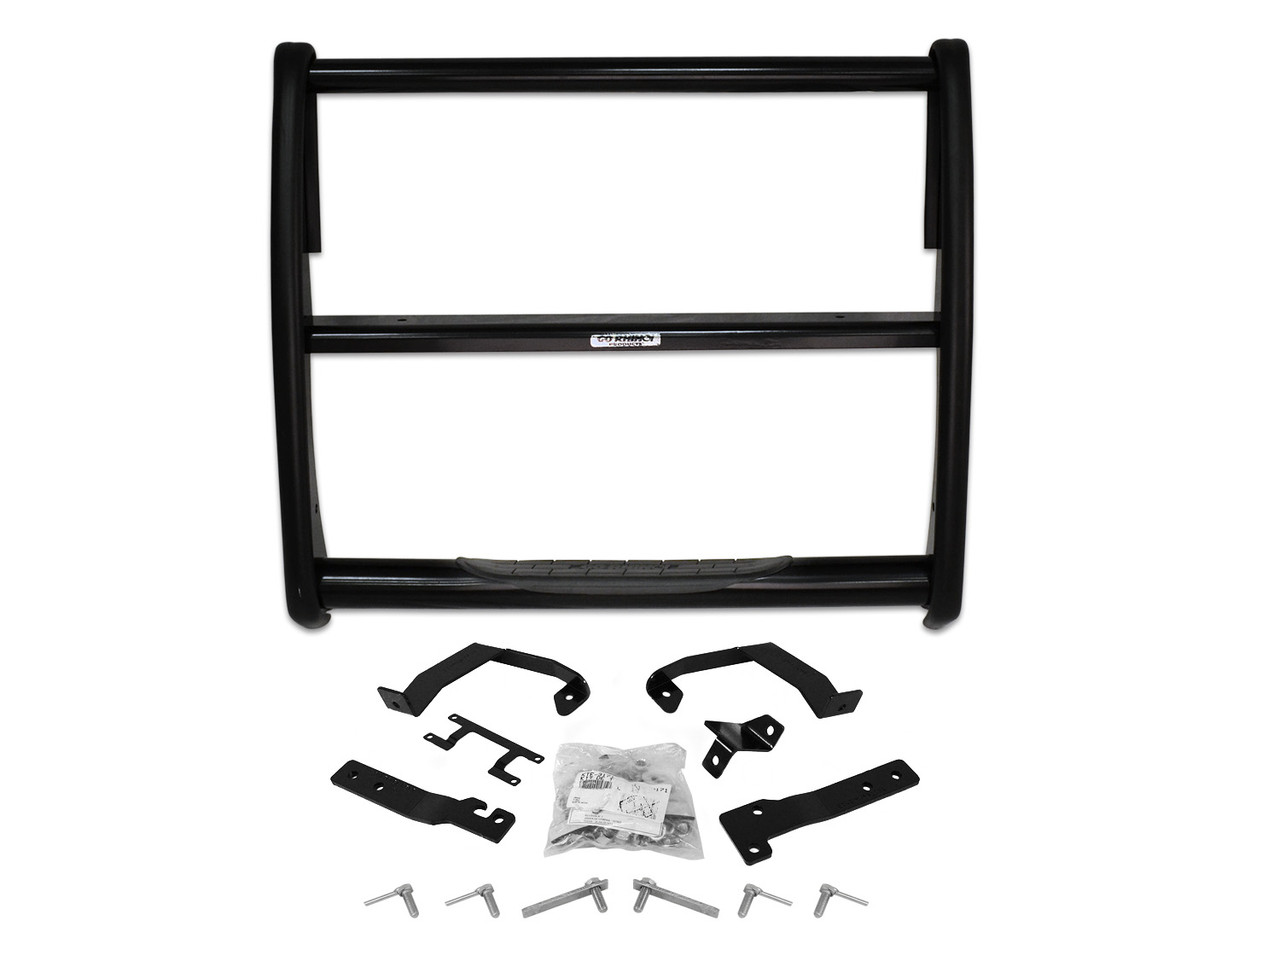 Go Rhino 3174B Chevrolet Silverado 1500 LD (Classic) 2014-2019 3000 Series StepGuard - Center Grille Guard Only, Black Mild Steel Installation Kit Included